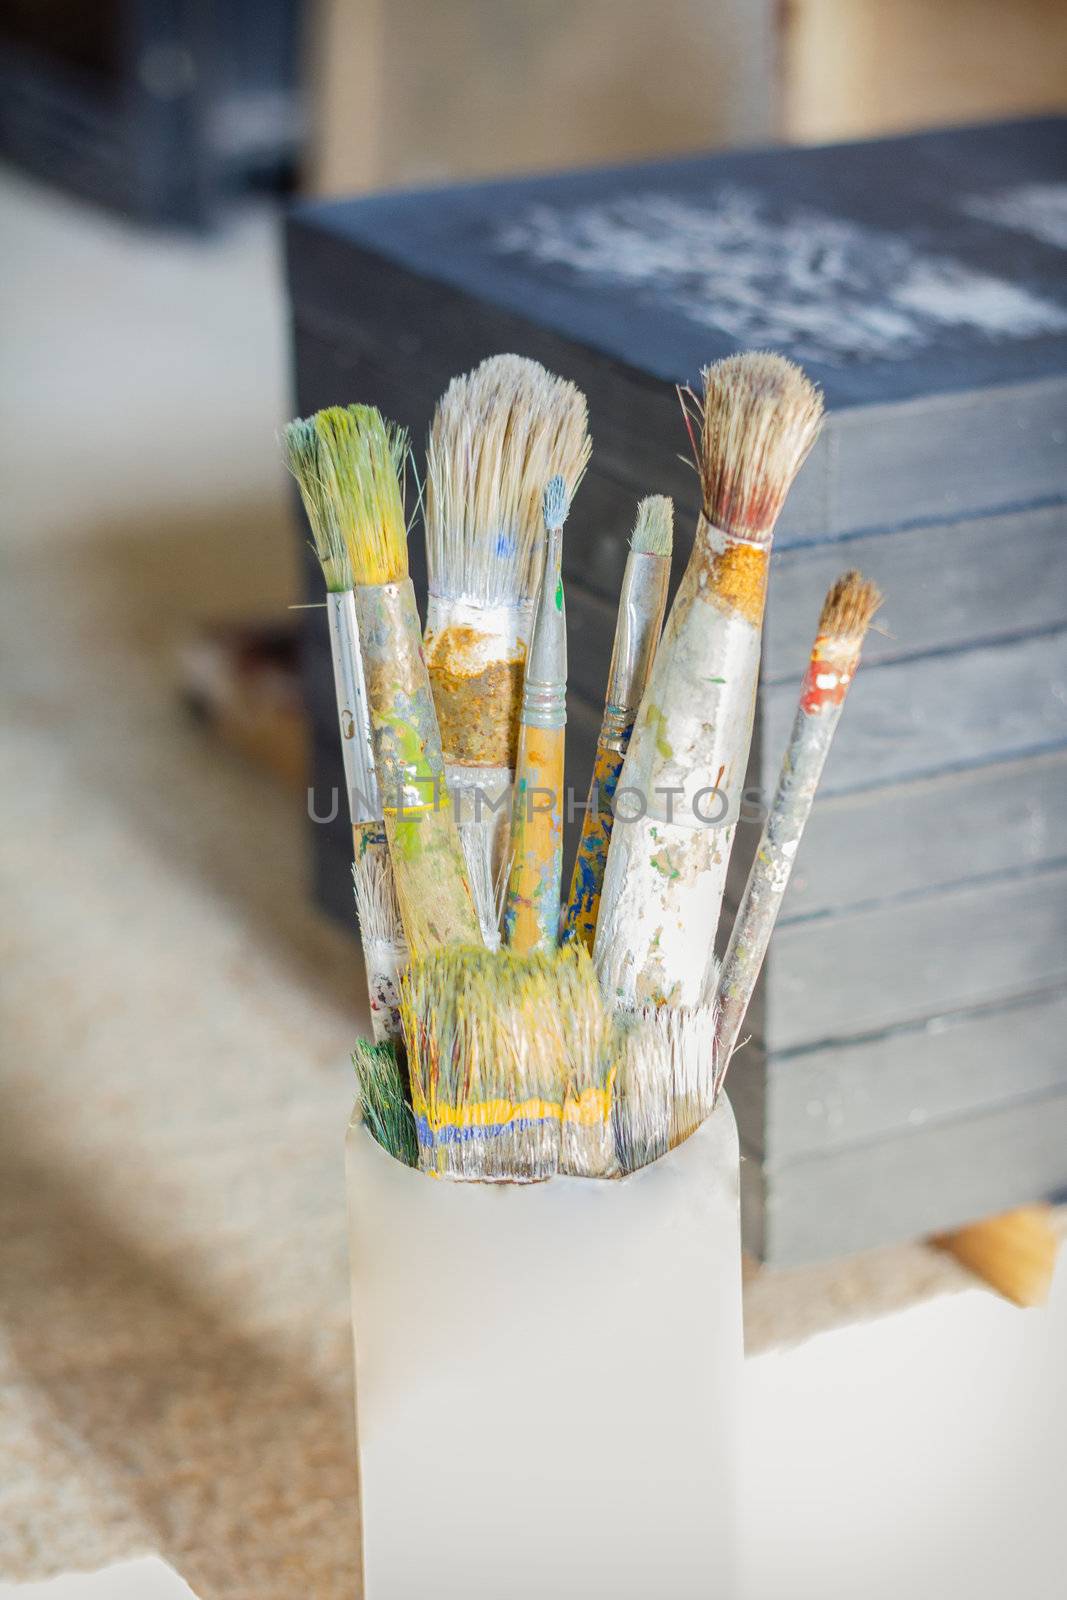 Set of paint brushes in front of canvas by doble.d